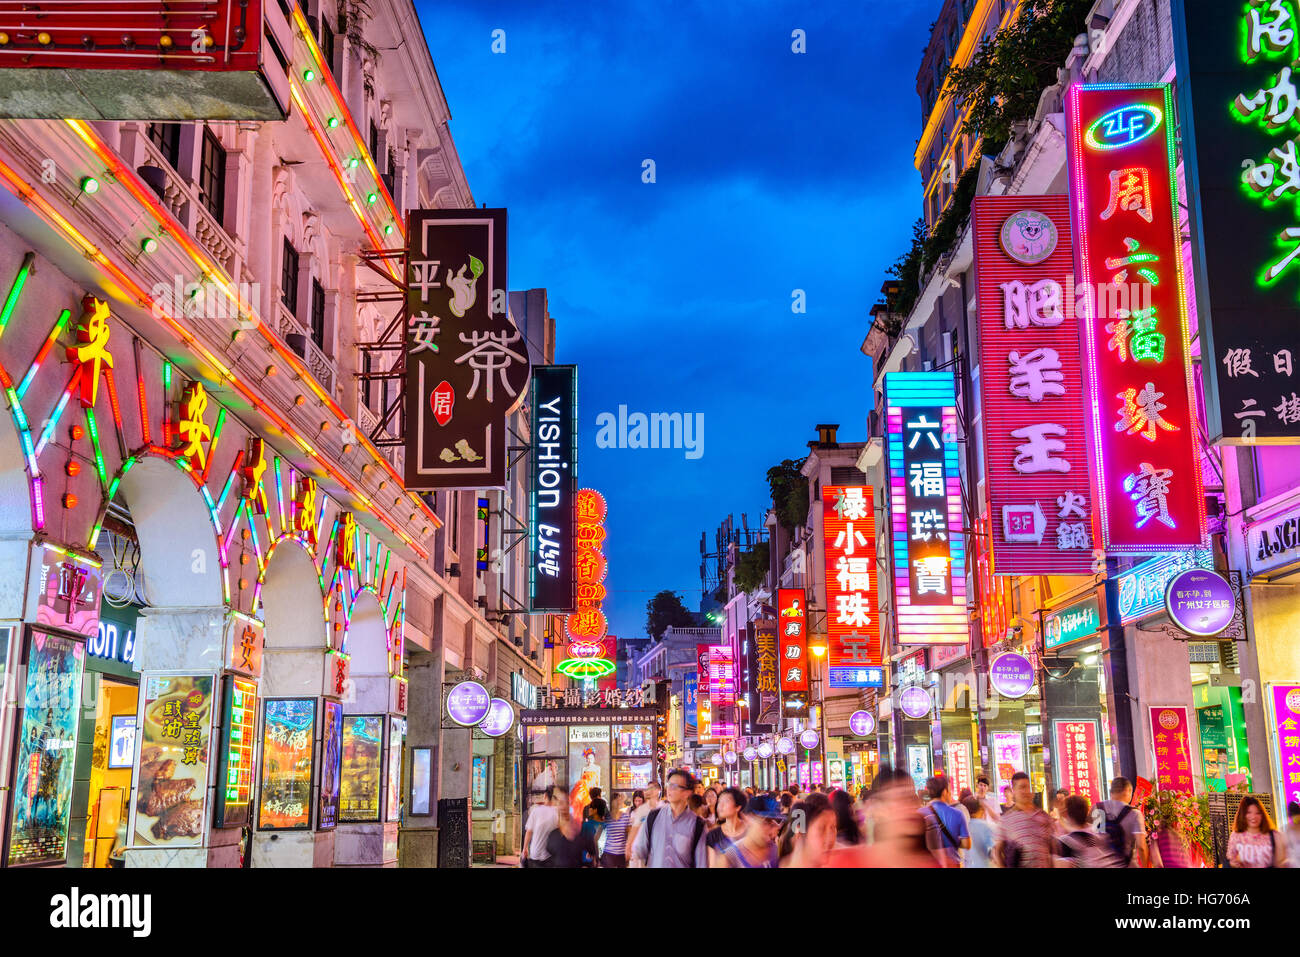 GUANGZHOU, CHINA - MAY 25, 2014: Pedestrians pass through Shangxiajiu Pedestrian Street. The street is the main shopping district of the city and a ma Stock Photo